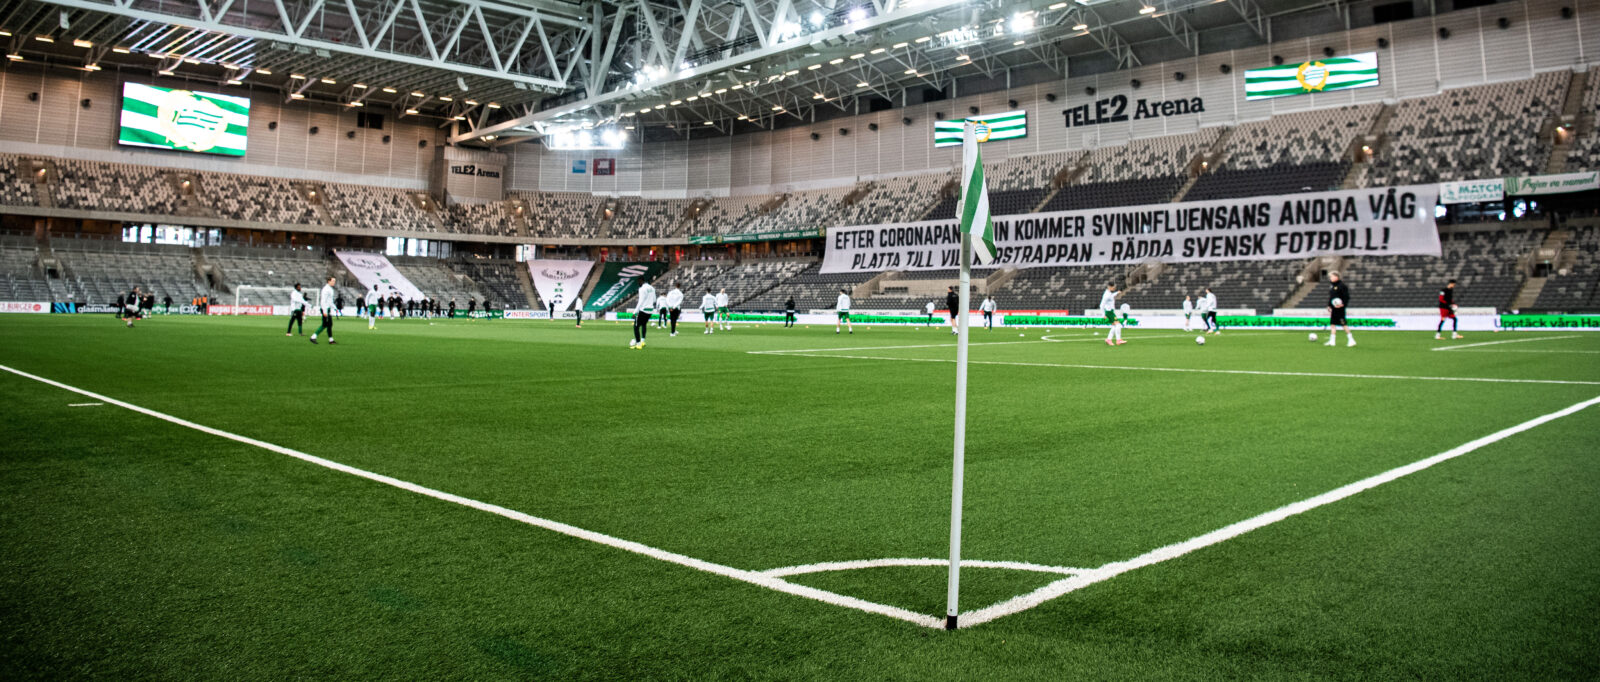 Sunday 7 March 2021, kl 13:00  Hammarby IF - AIK 3-2 (0-1)  Tele2 Arena, Stockholm